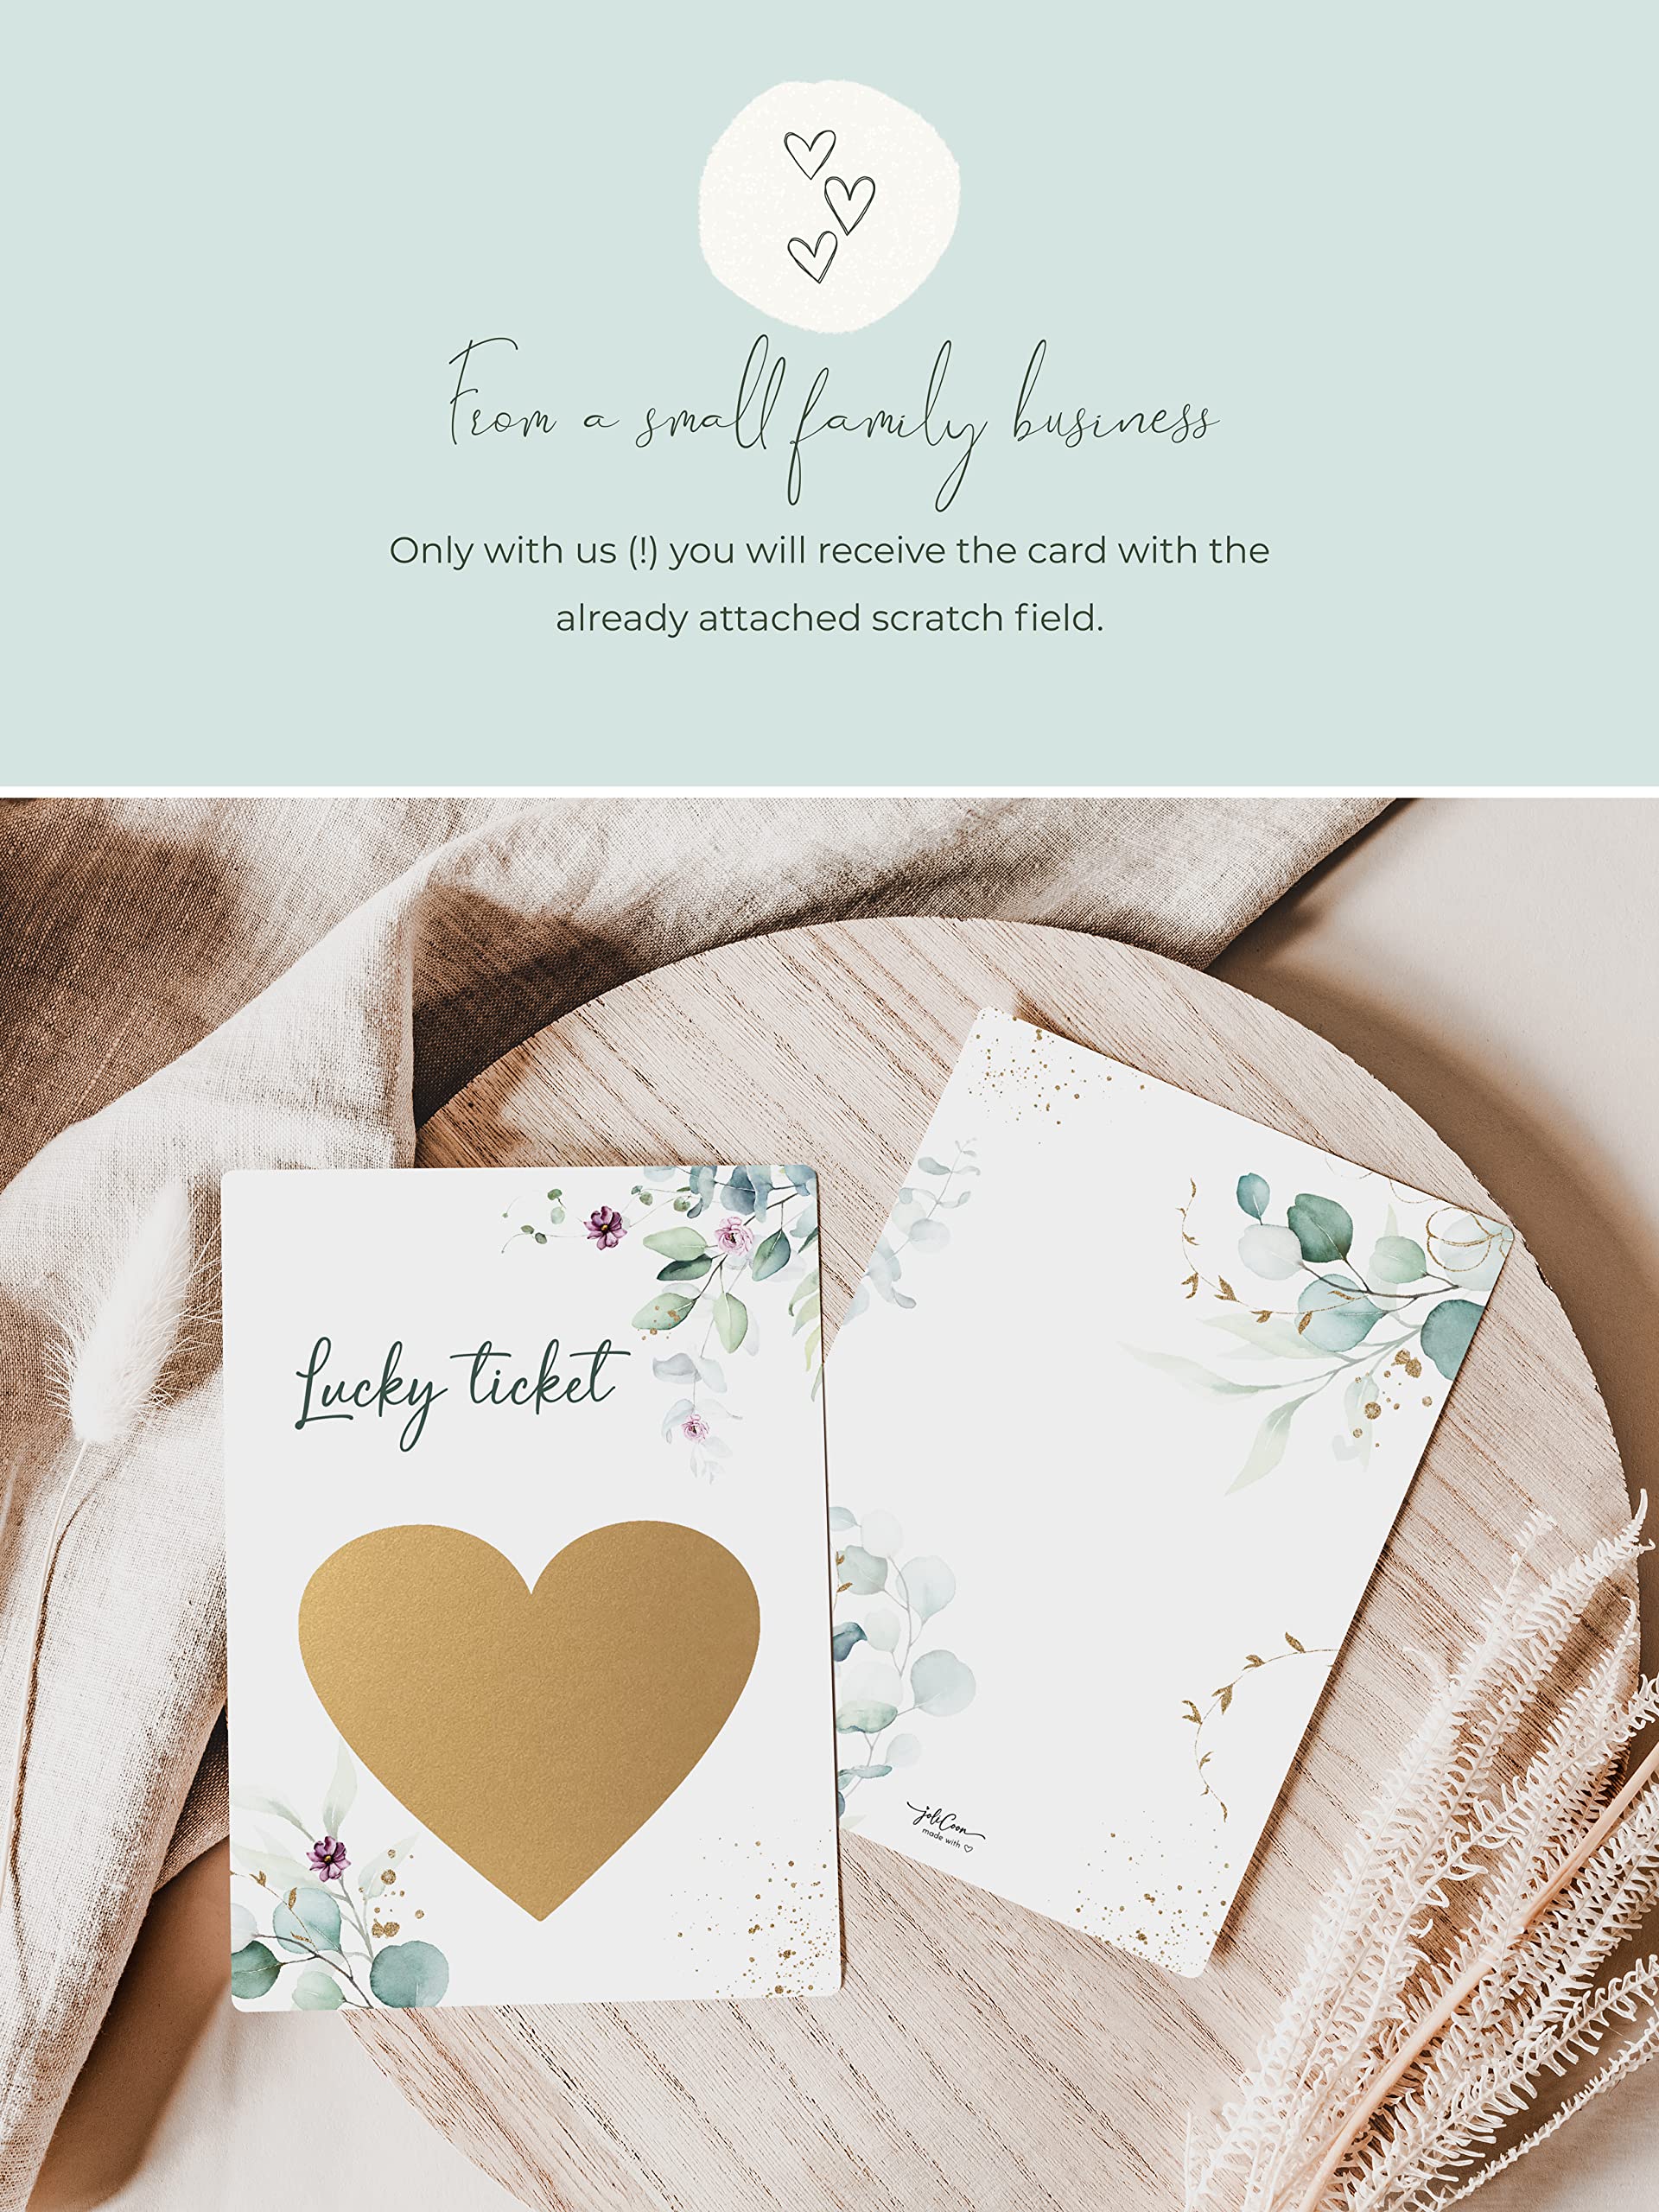 Joli Coon Pregnancy announcement scratch card - You are going to be a great grandma - Baby announcement - Eucalyptus